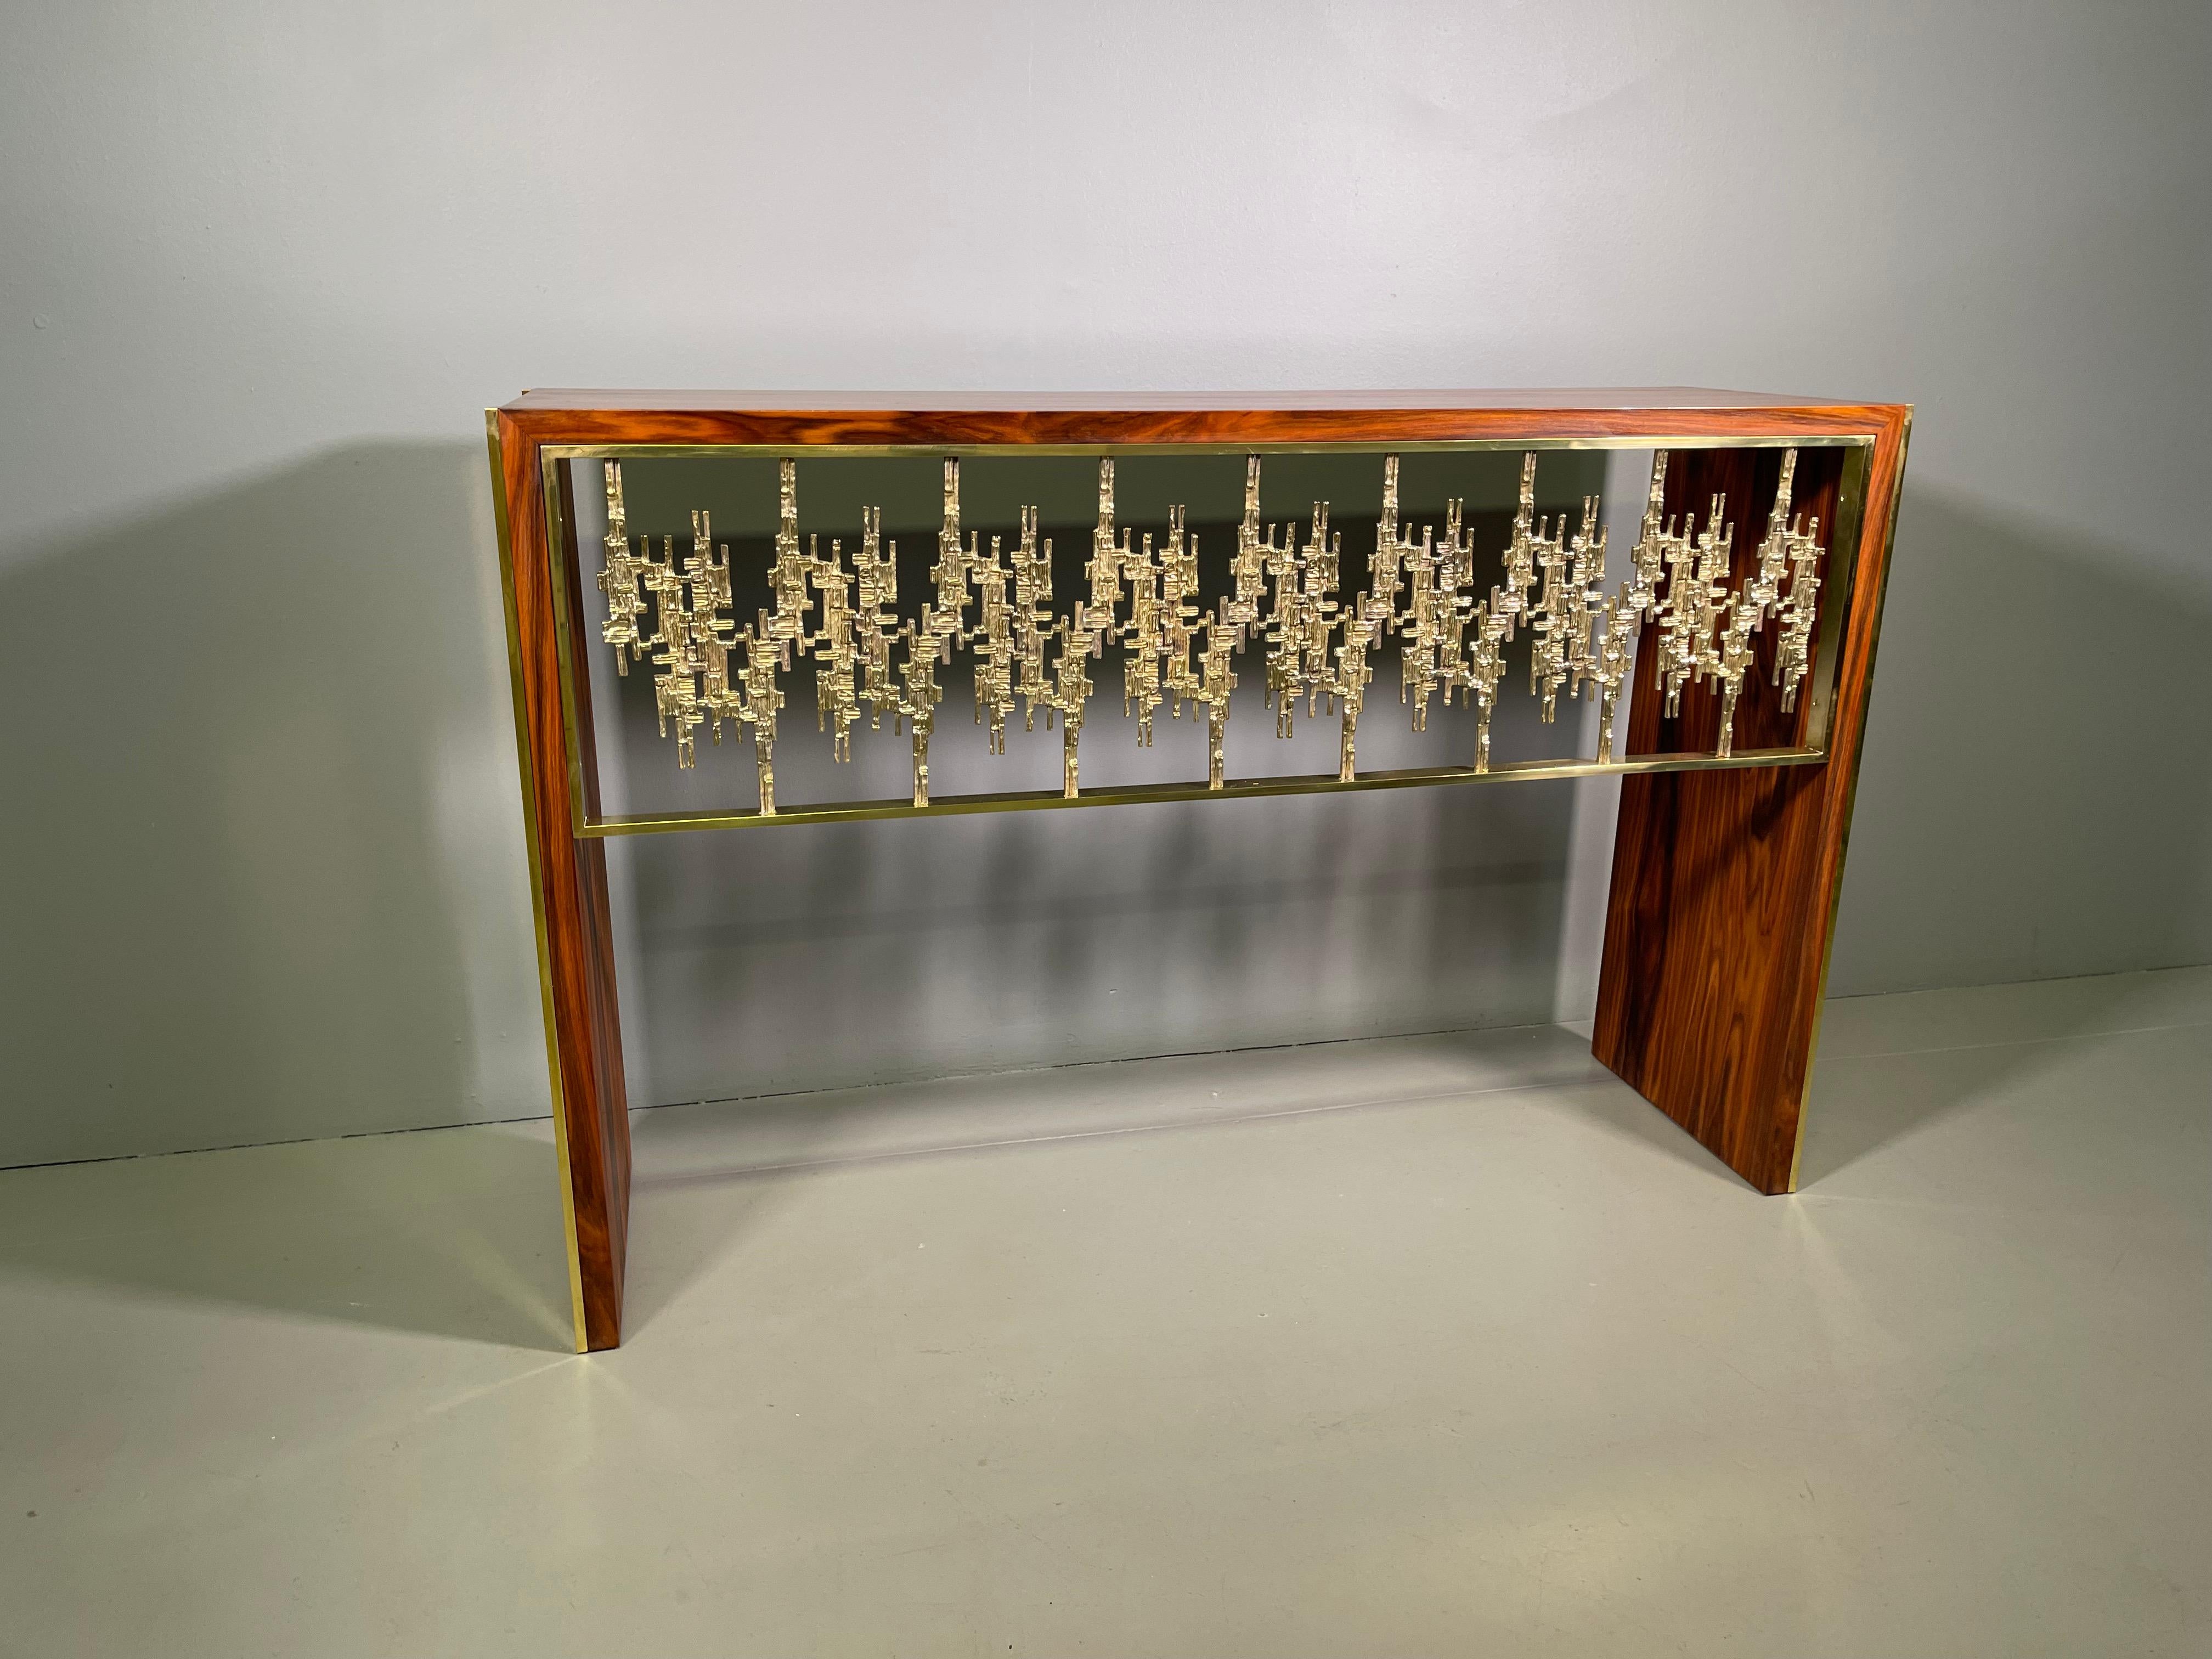 Italian Sculptural Console by Luciano Frigerio in Palisander and Brass, 1970s For Sale